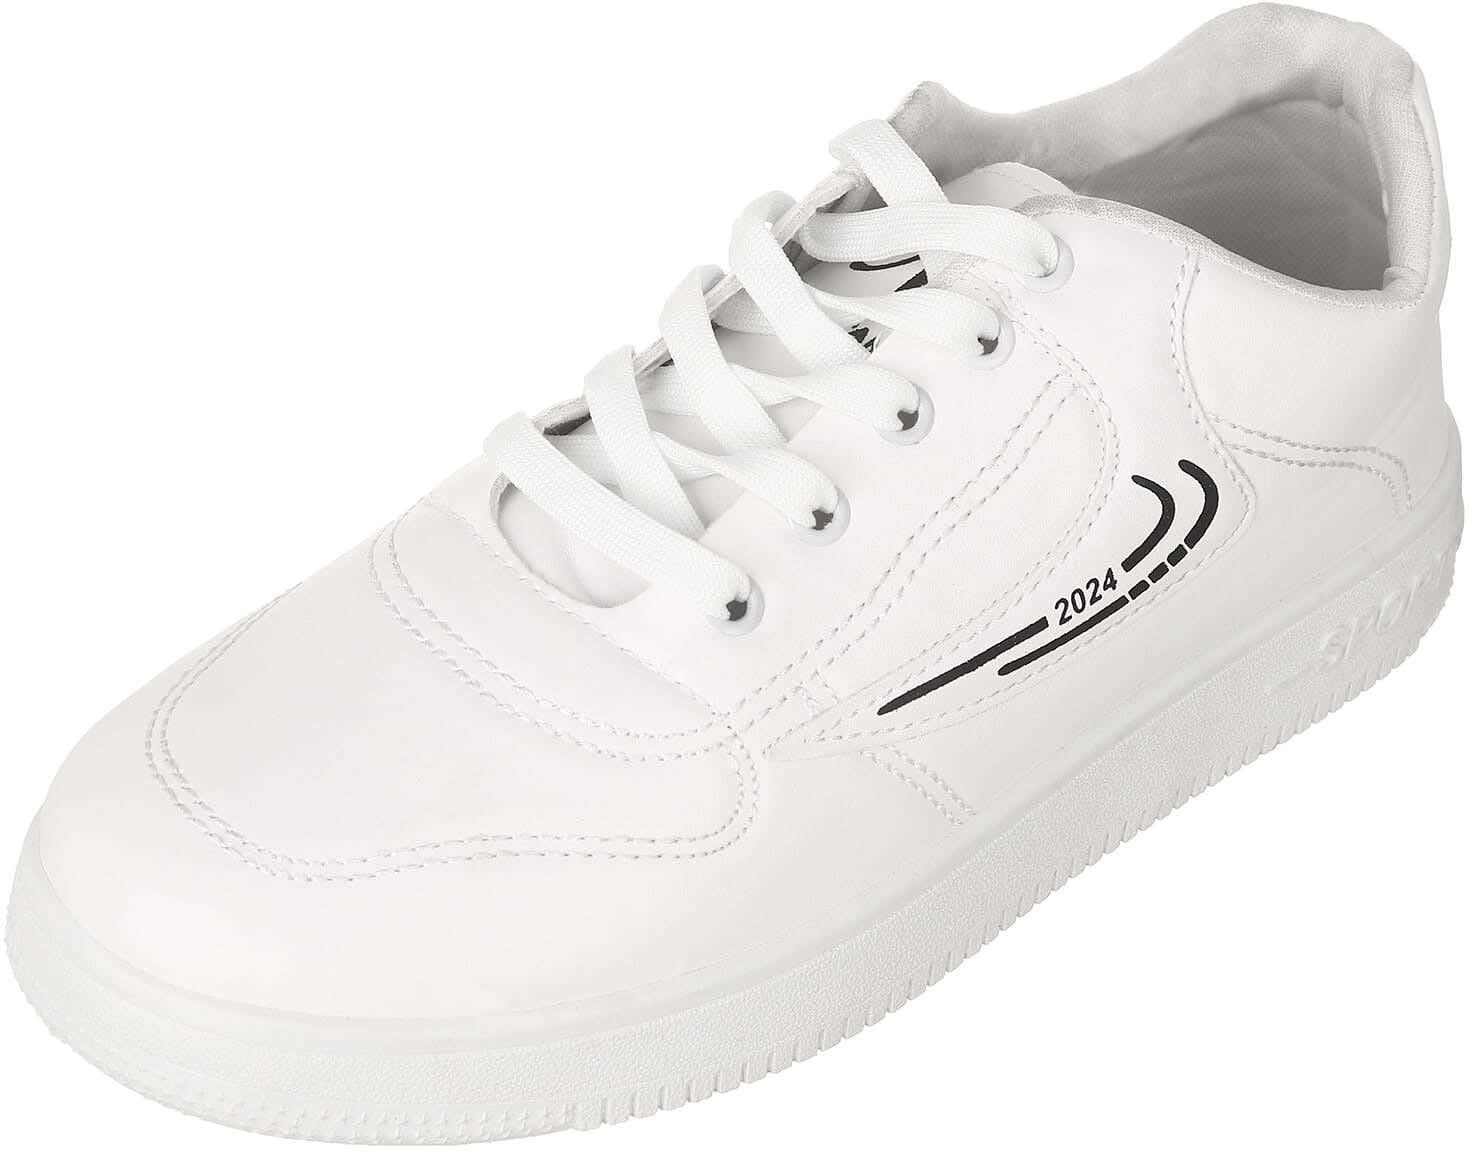 Get Asia Leather Lace Up Shoes for Men, 44 EU - White with best offers | Raneen.com